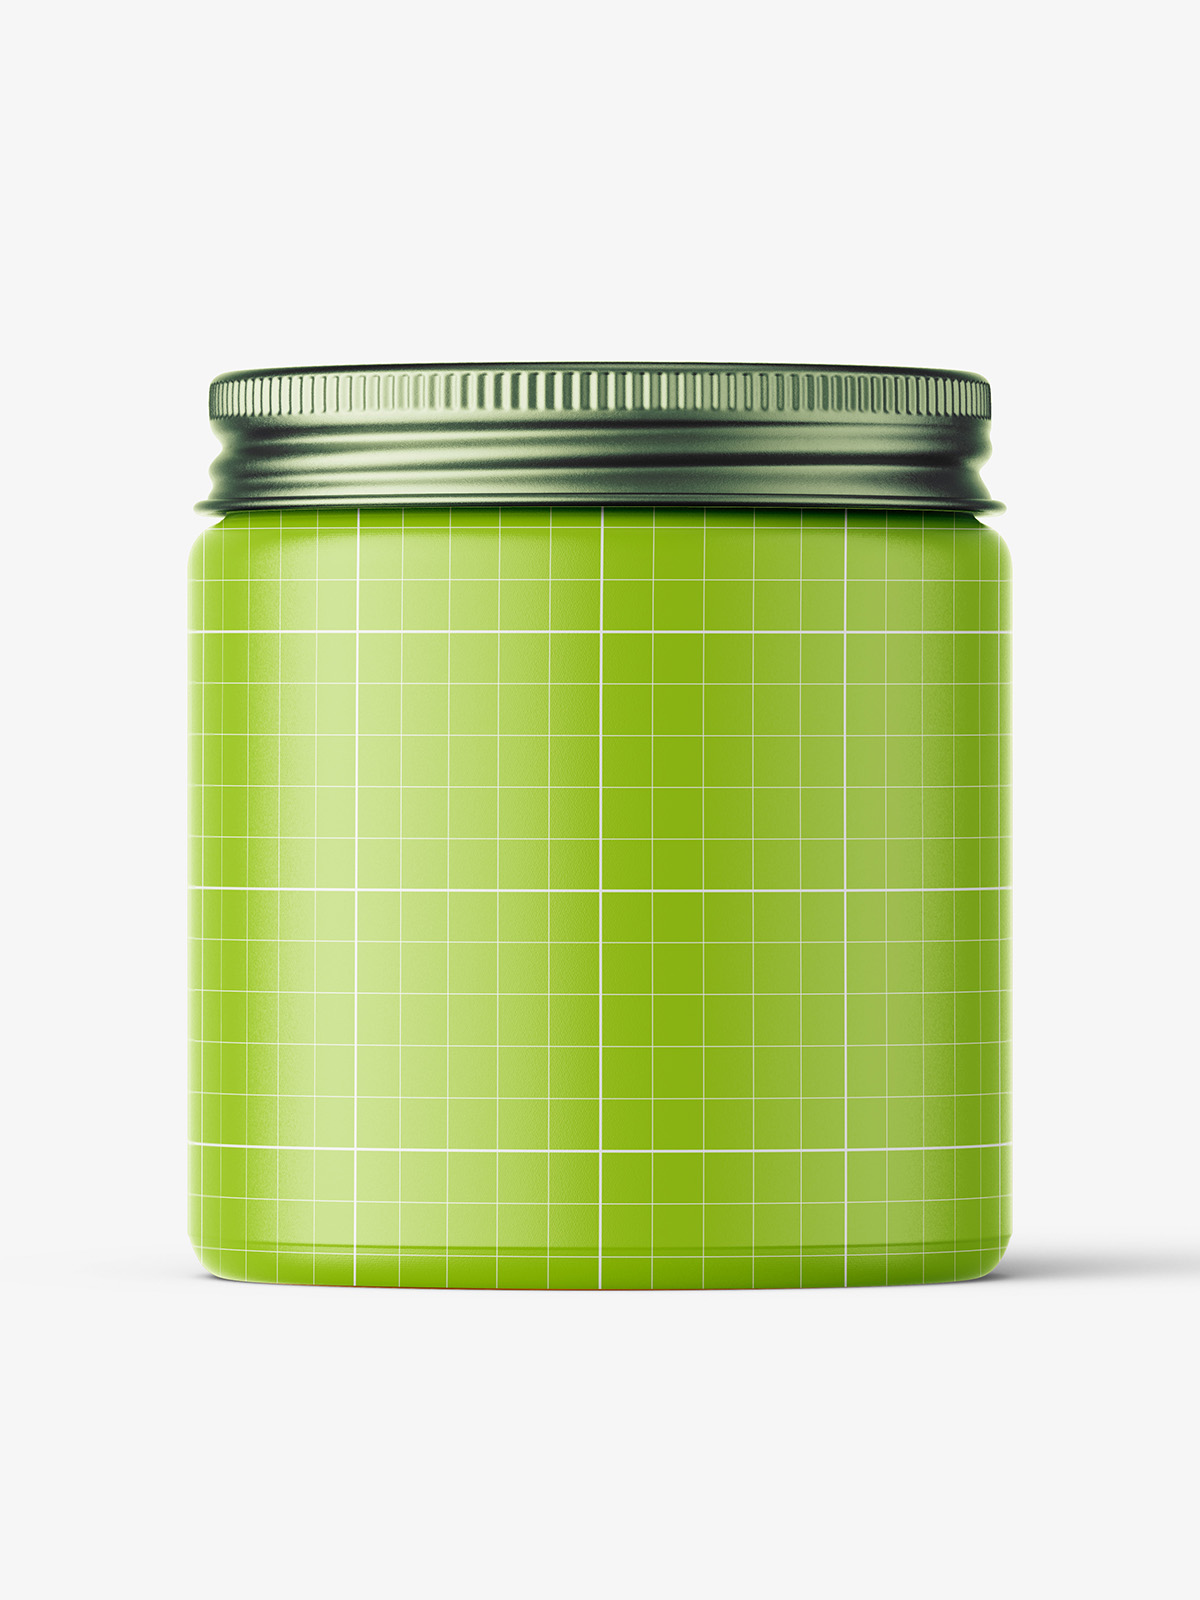 Download Cosmetic Jar Mockup With Silver Cap 120ml Clear Smarty Mockups